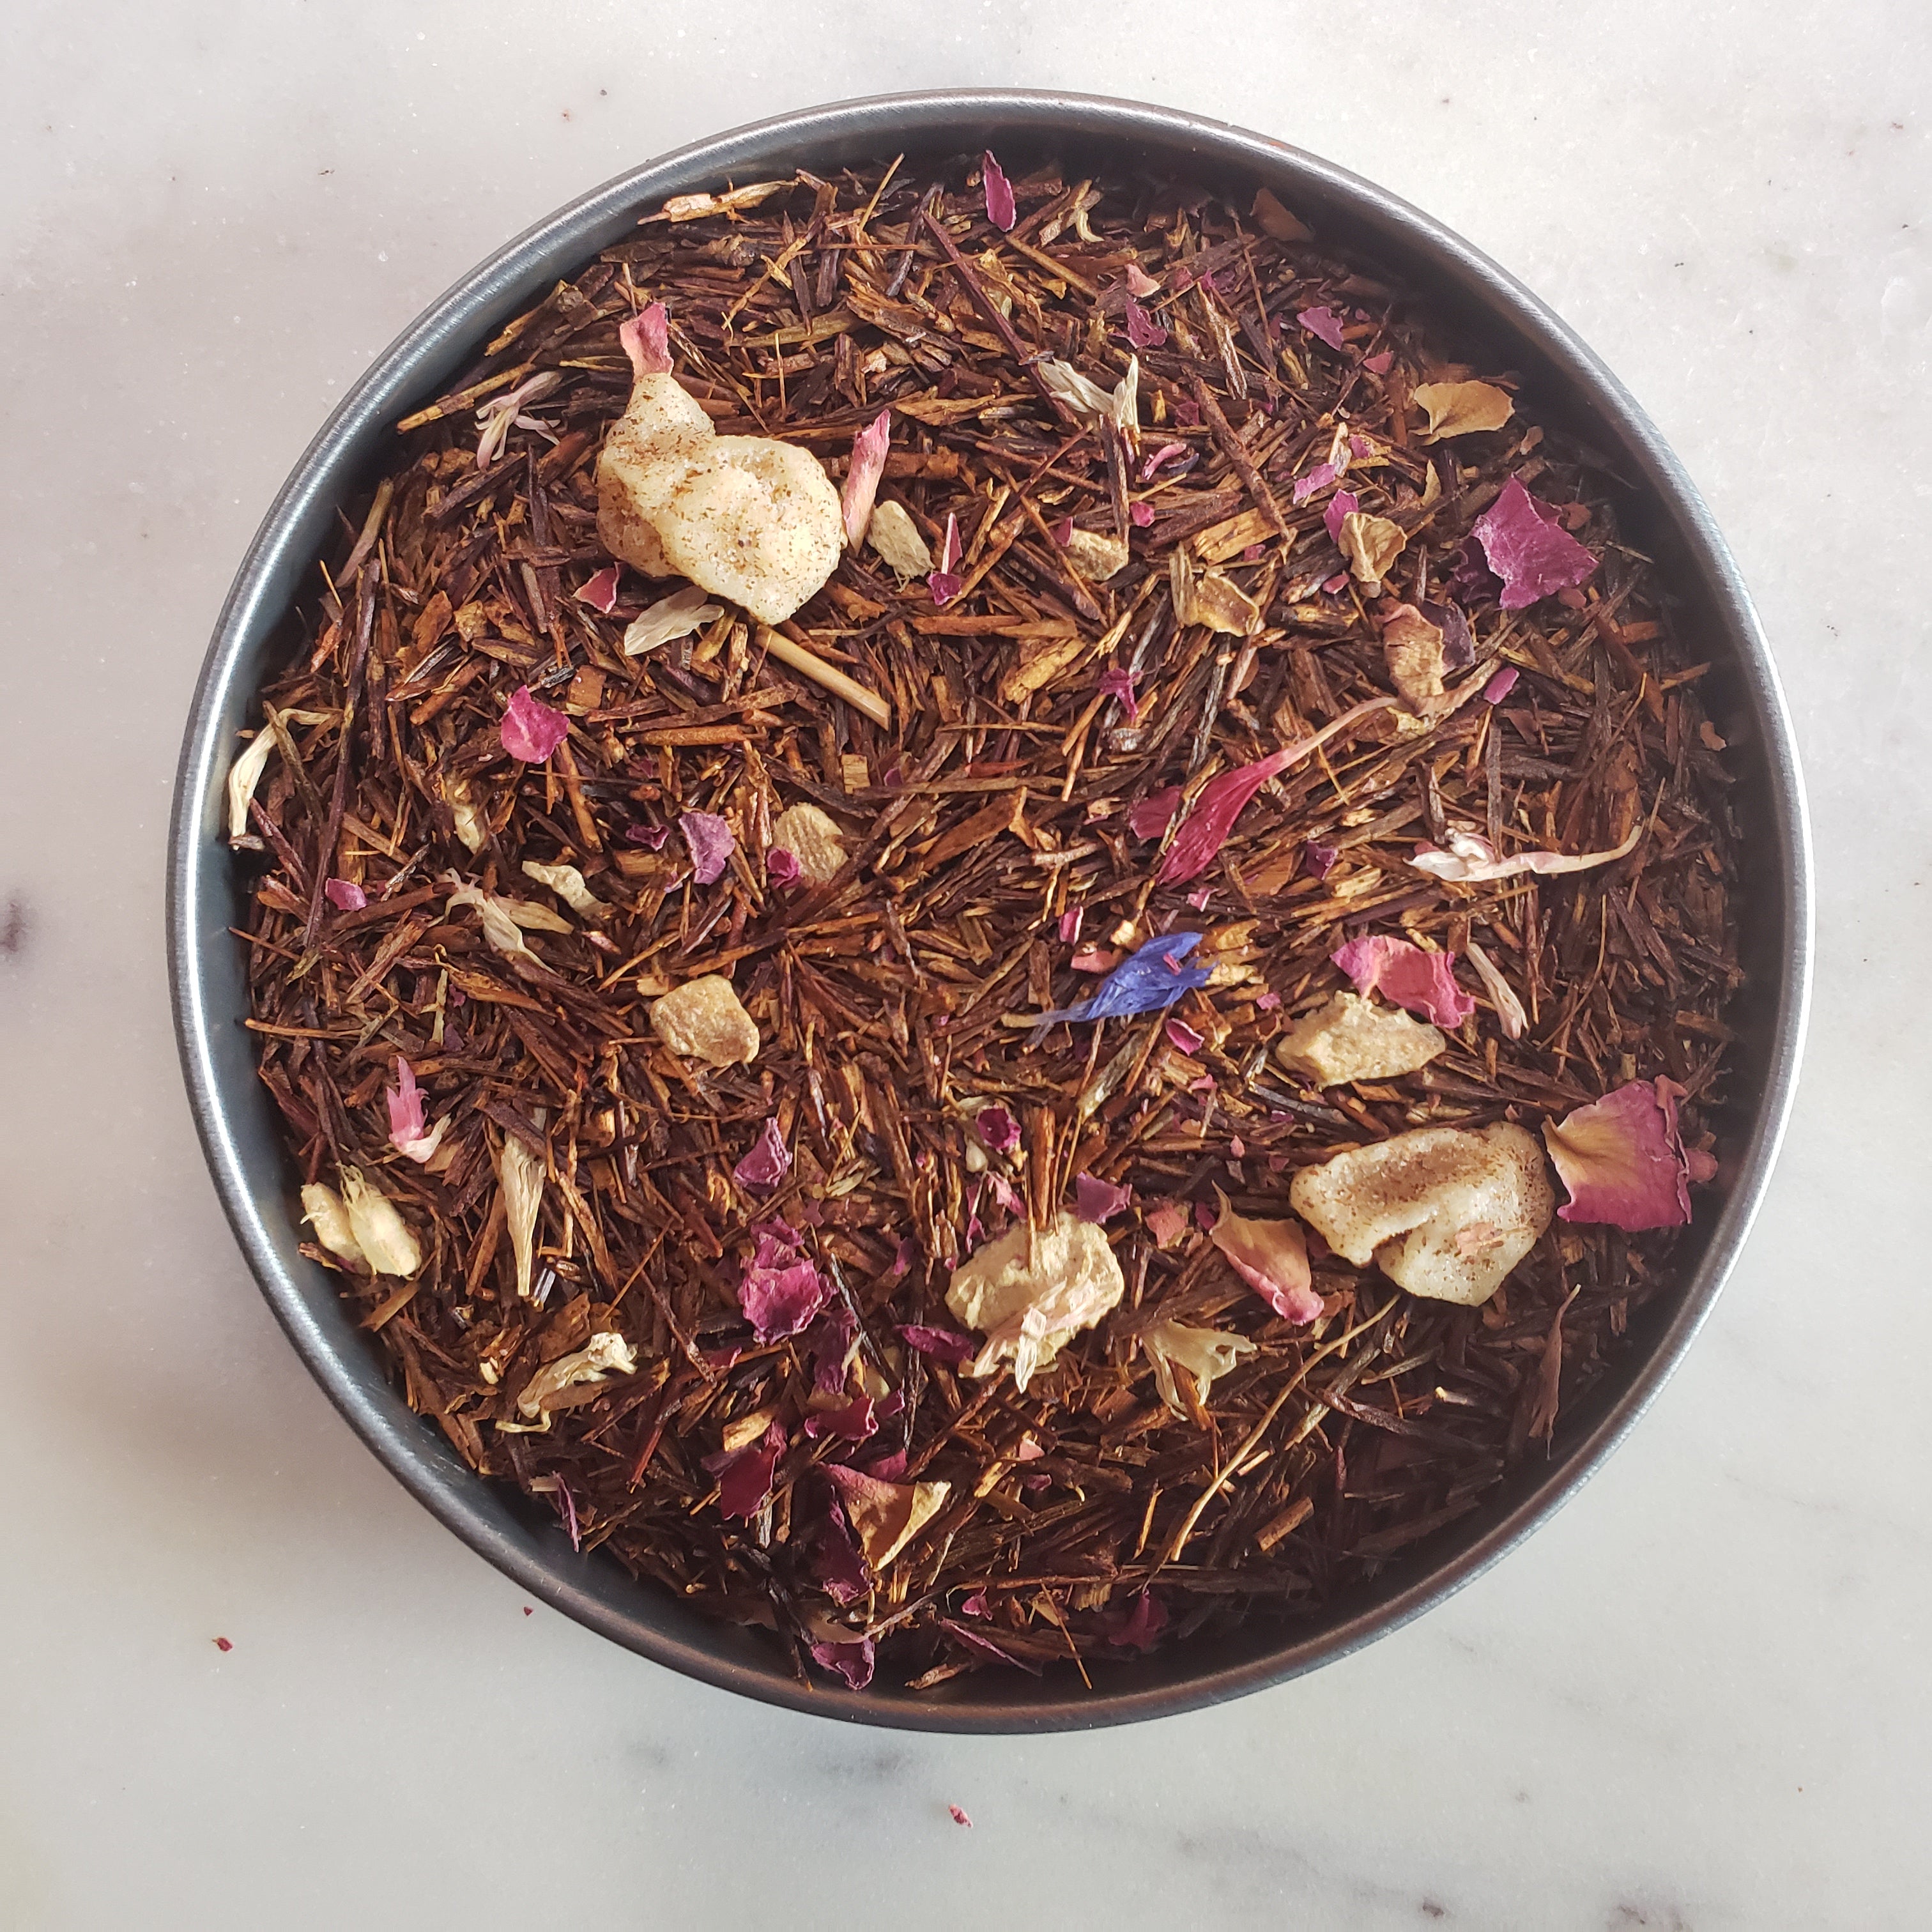 I Am Strong - Pineapple Ginger Rooibos